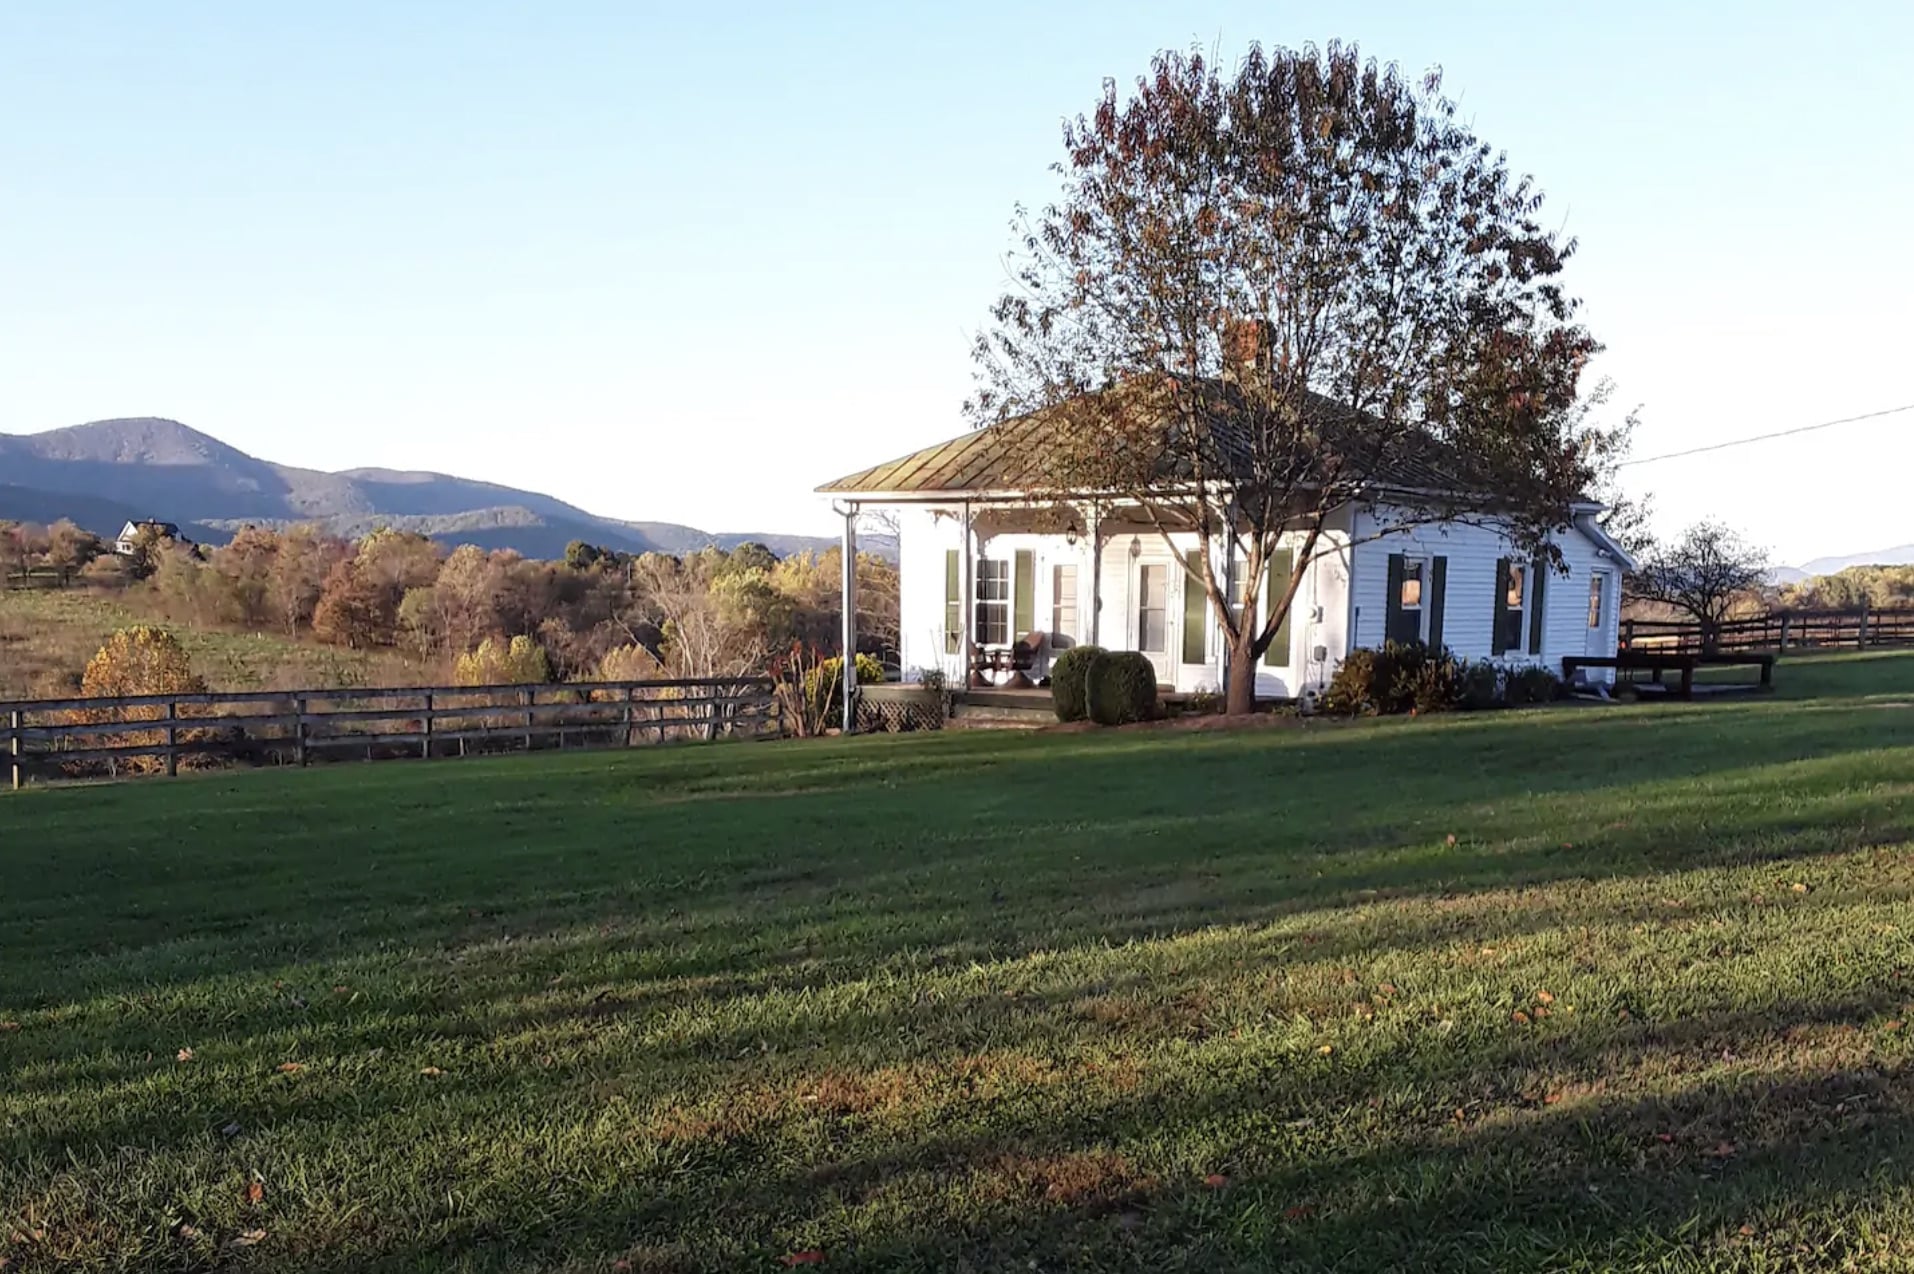 Stay in a Virginia Schoolhouse Airbnb